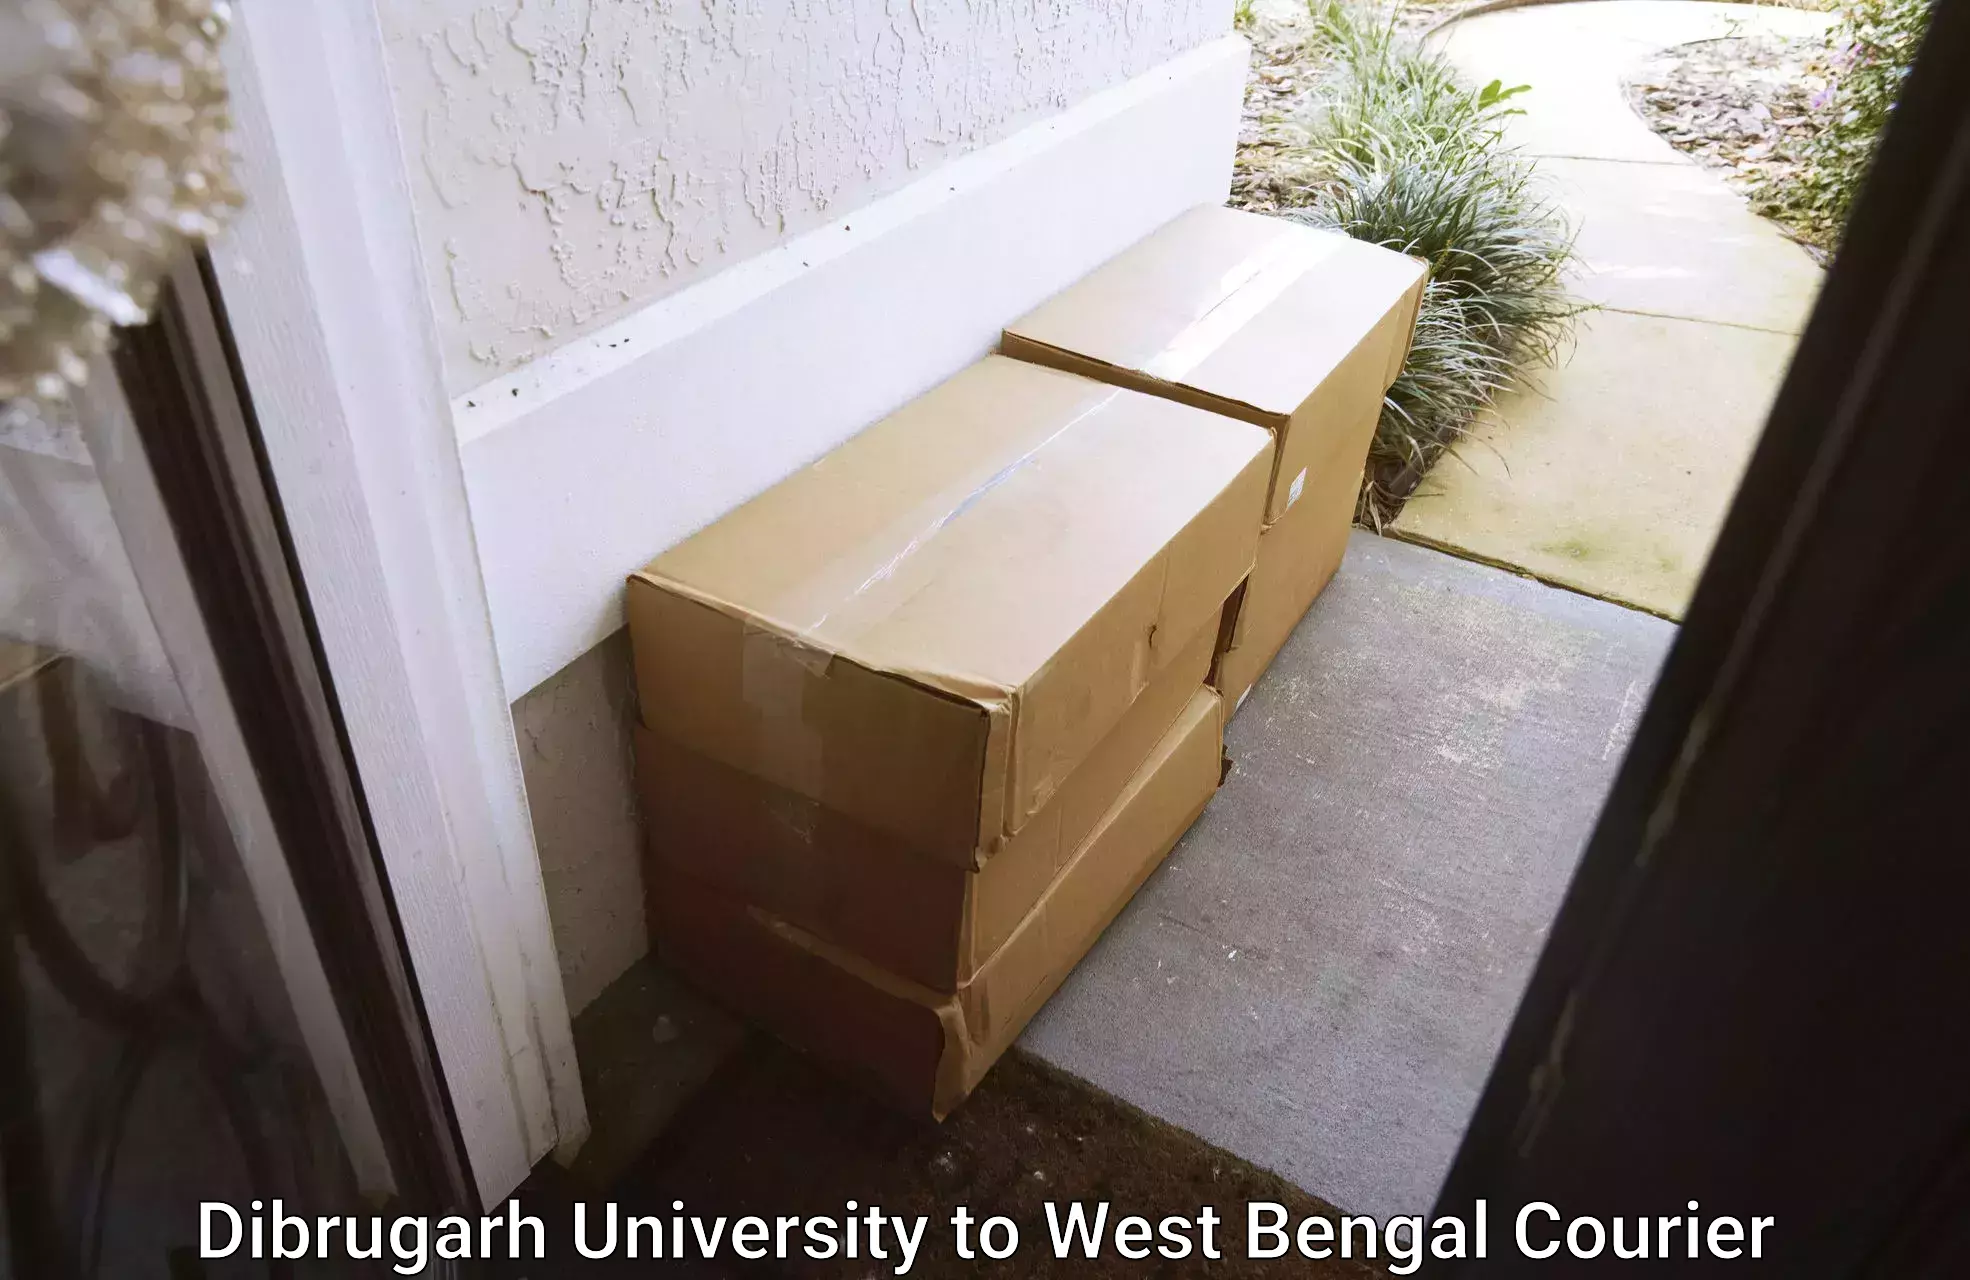 Courier service partnerships Dibrugarh University to Ennore